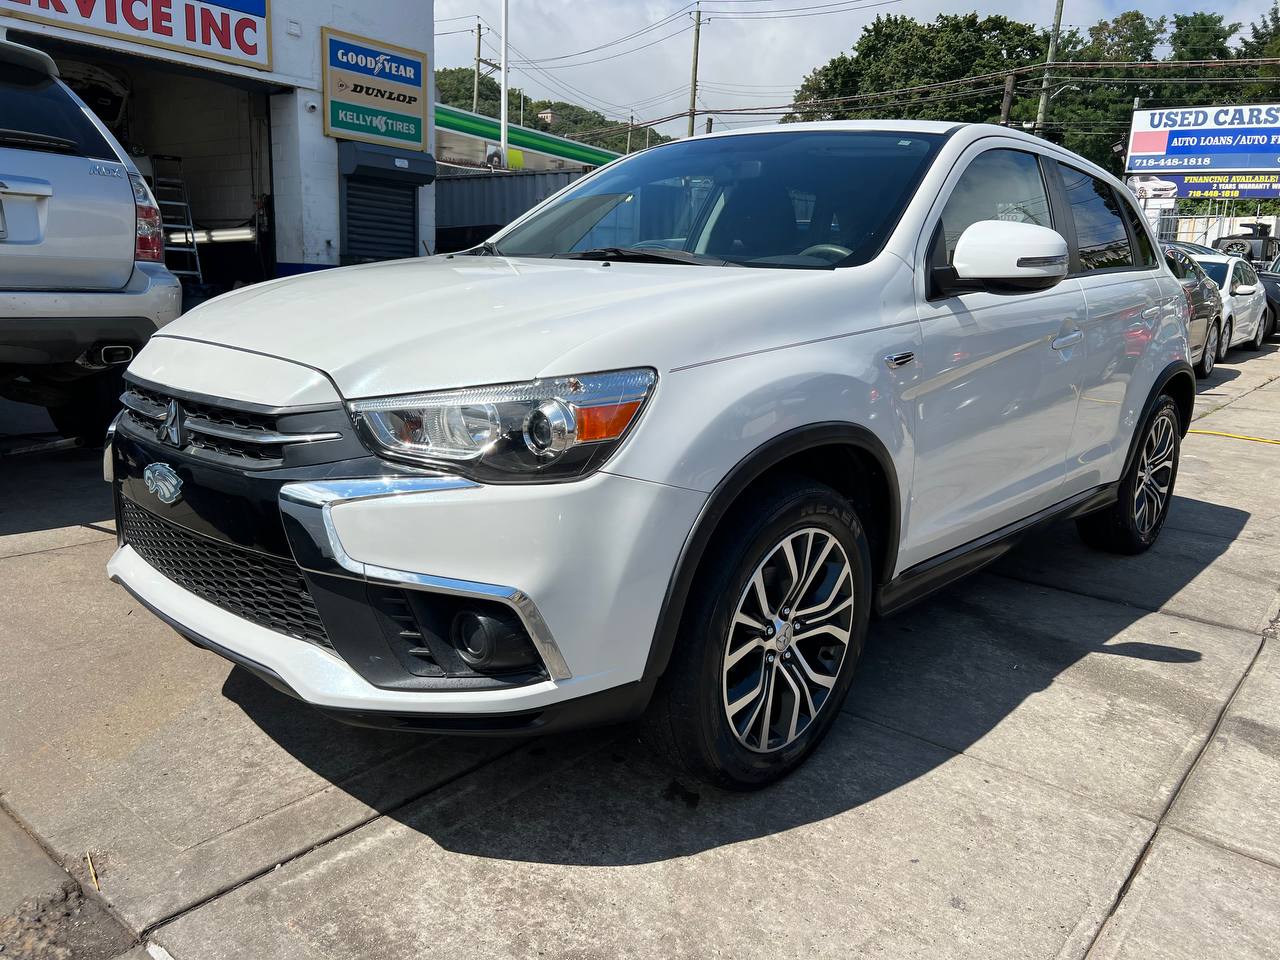 Used Car - 2019 Mitsubishi Outlander Sport ES for Sale in Staten Island, NY